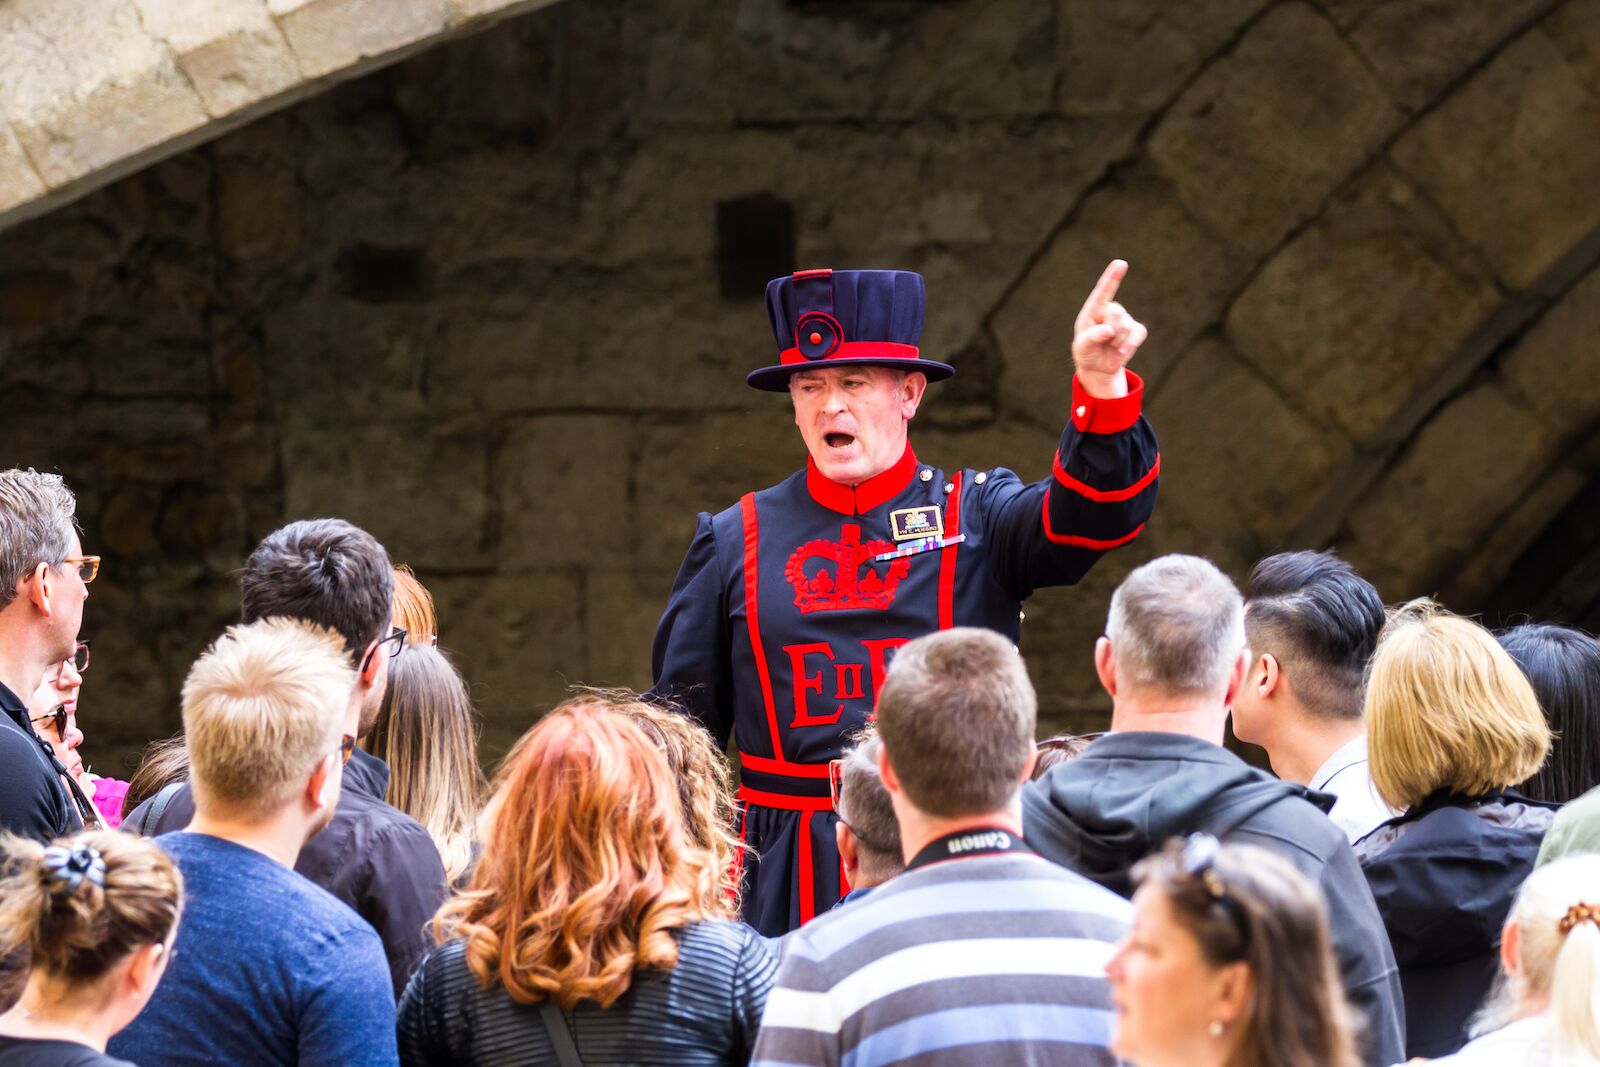 A Yeoman Warder at the Tower of London